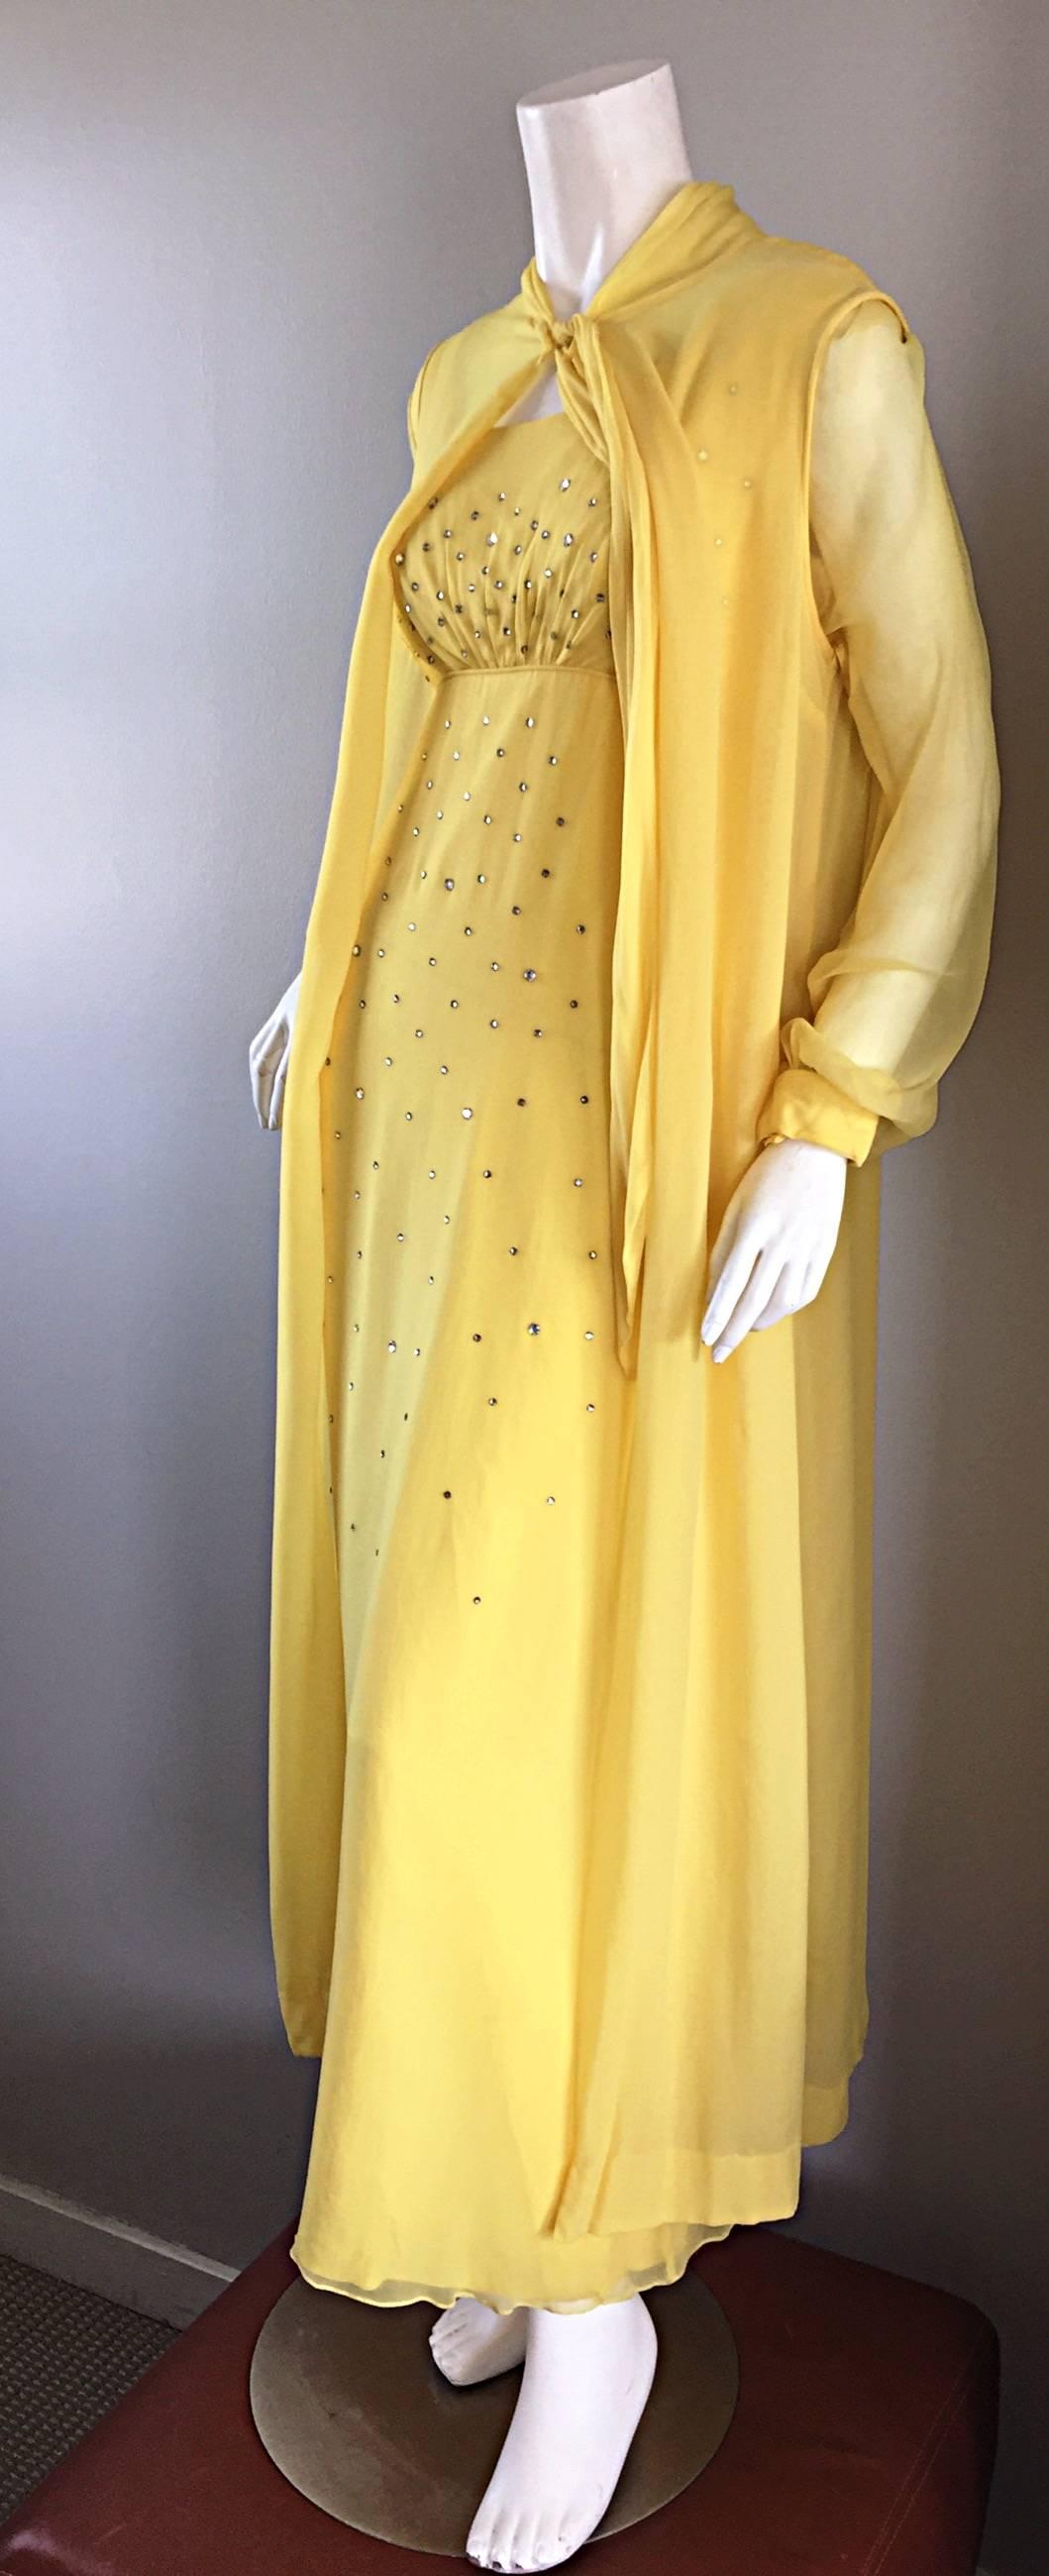 Absolutely fabulous vintage 1970s LORIS AZZARO Couture yellow silk chiffon long sleeve gown and sleeveless cape! Encrusted with hand-sewn rhinestones on the front empire bodice of the gown. This dress screams AMAZING! Chic billow semi sheer bishop